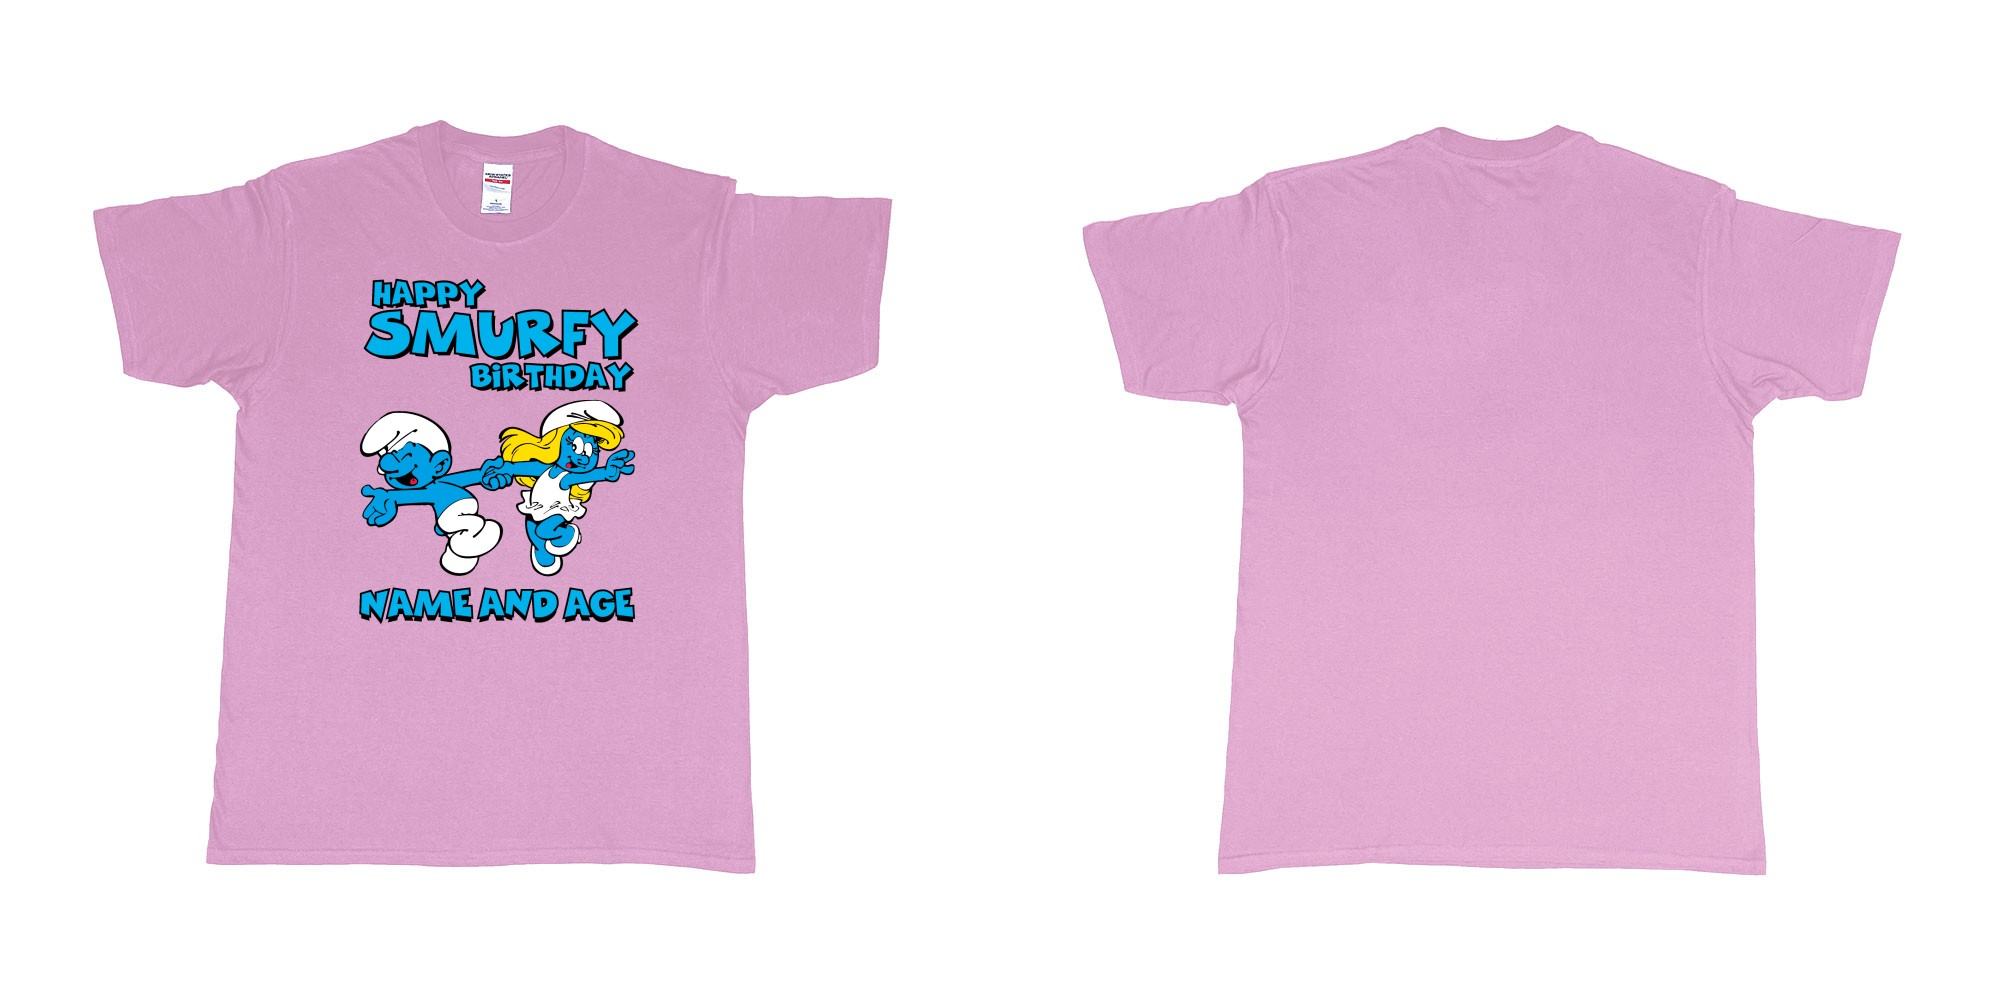 Custom tshirt design happy smurfy birthday in fabric color light-pink choice your own text made in Bali by The Pirate Way